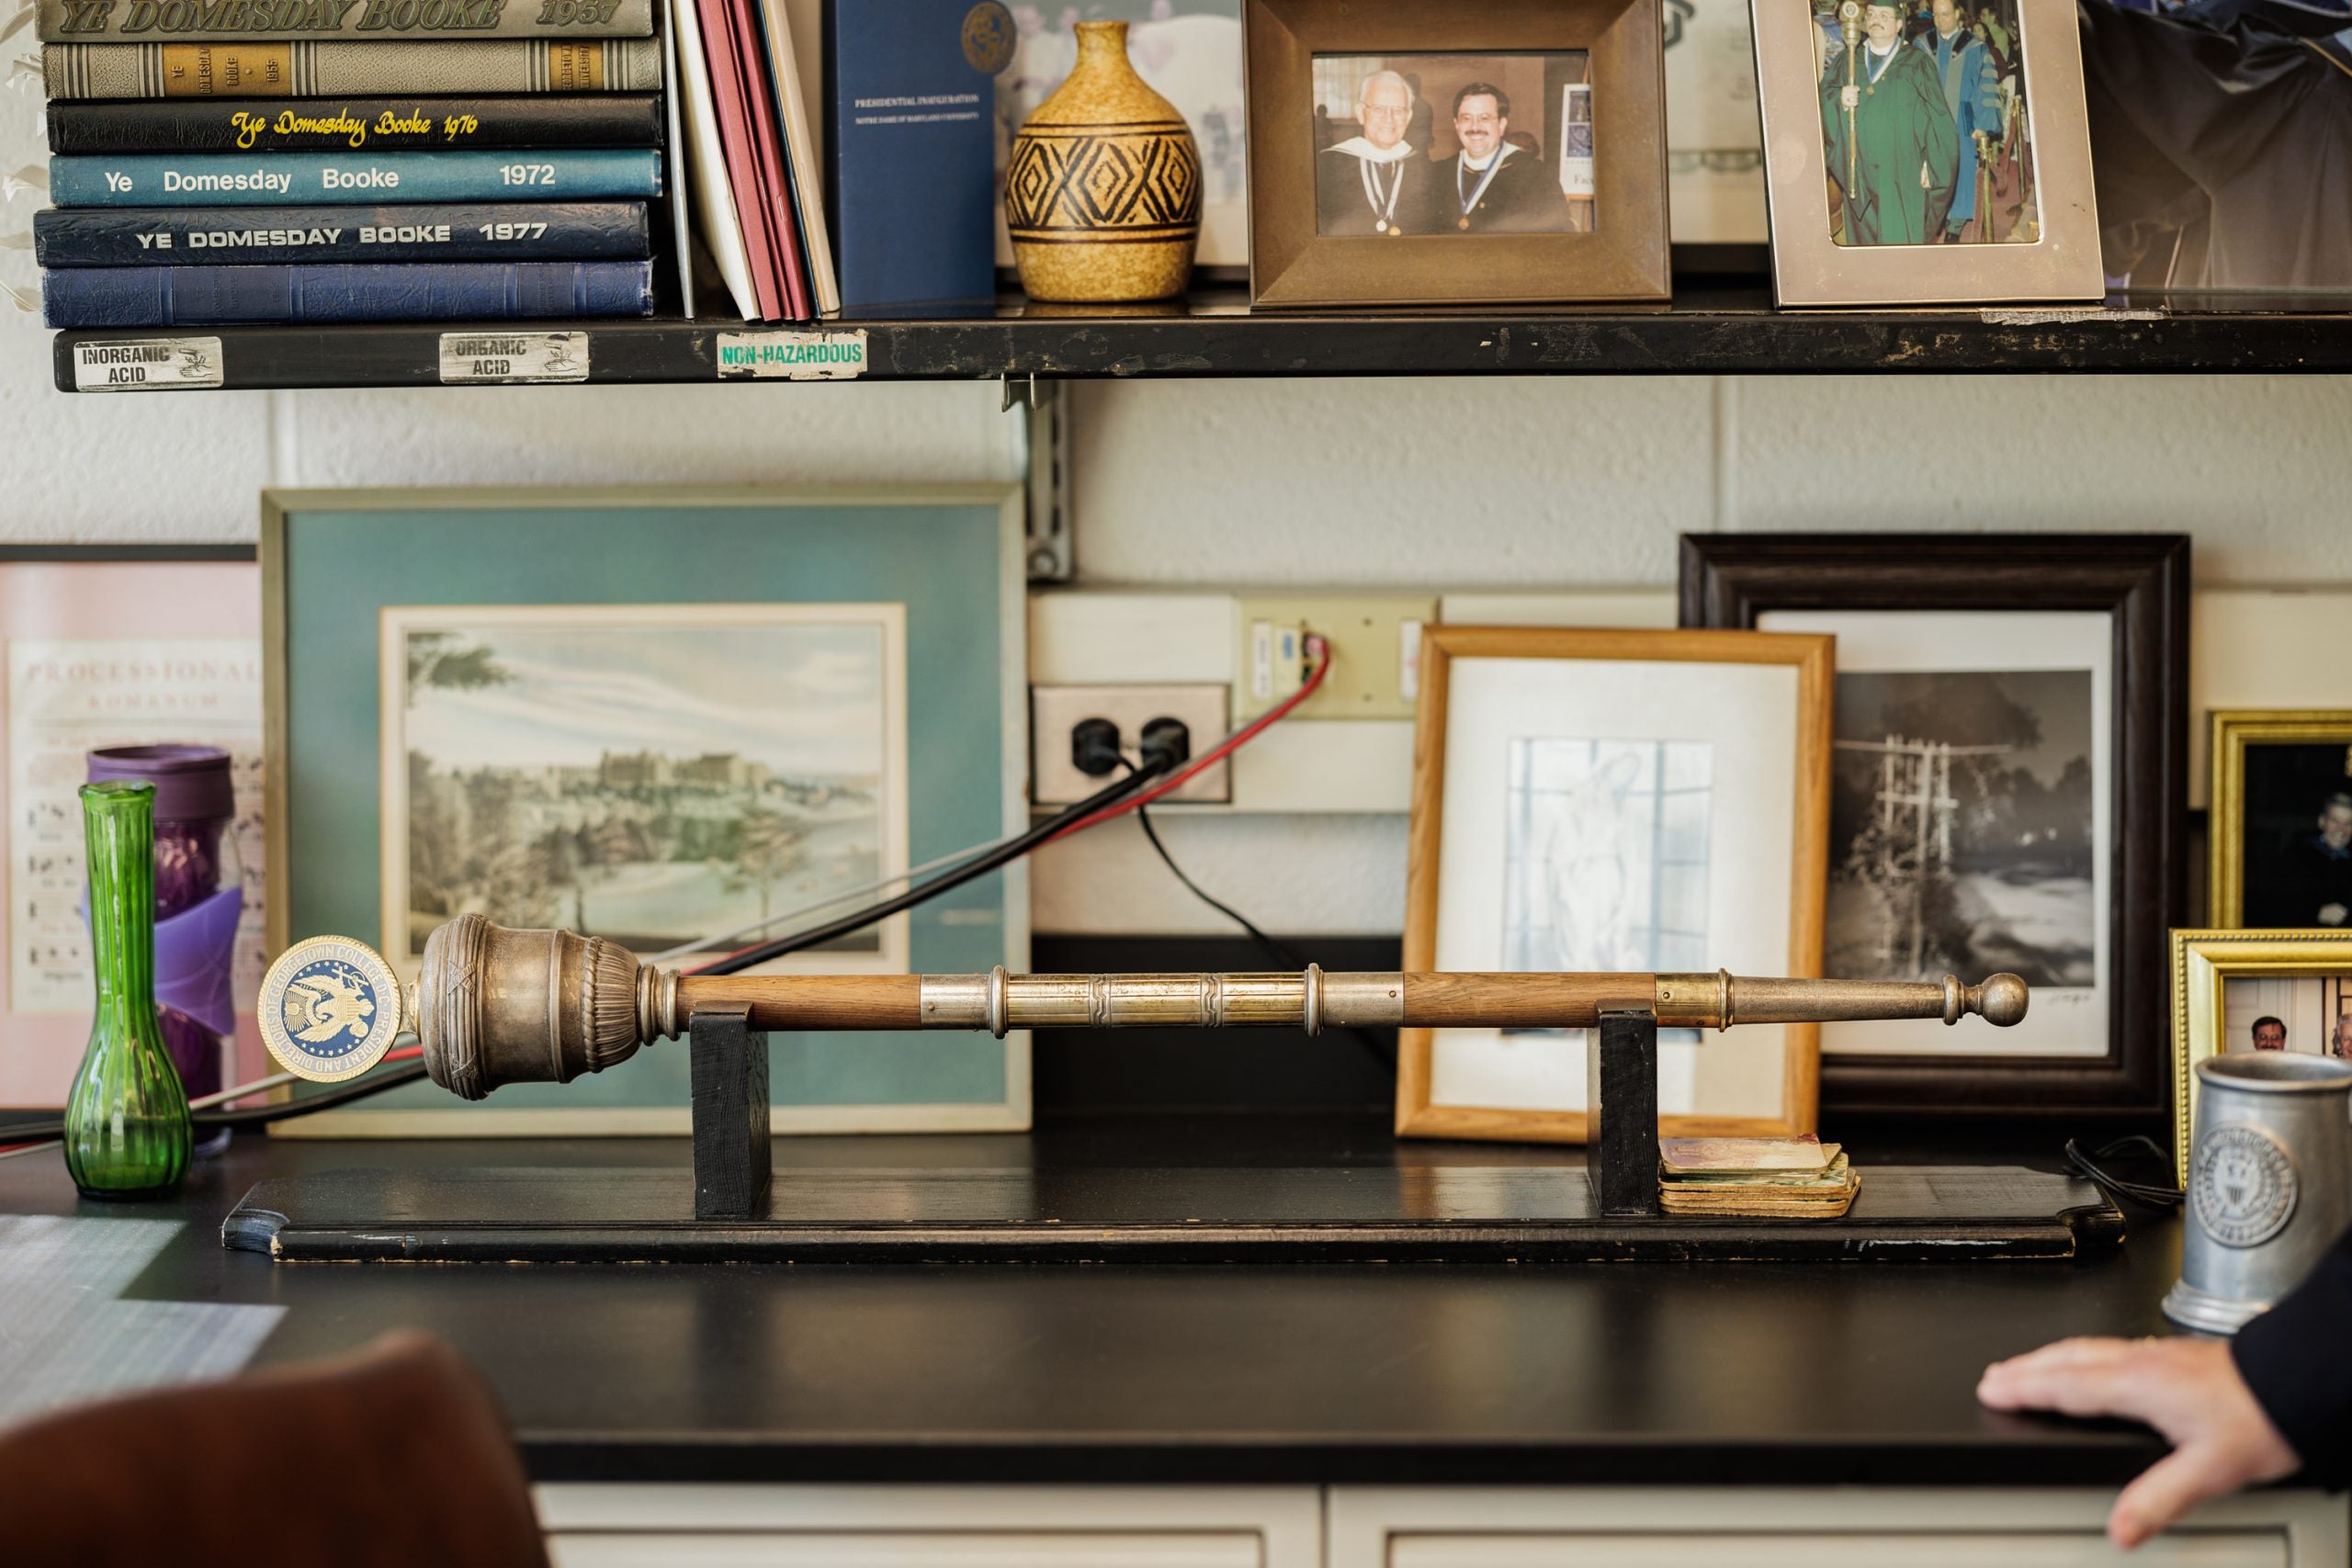 A mace, or heavy staff emblazoned with a seal at the top, sits in a holder in an office.